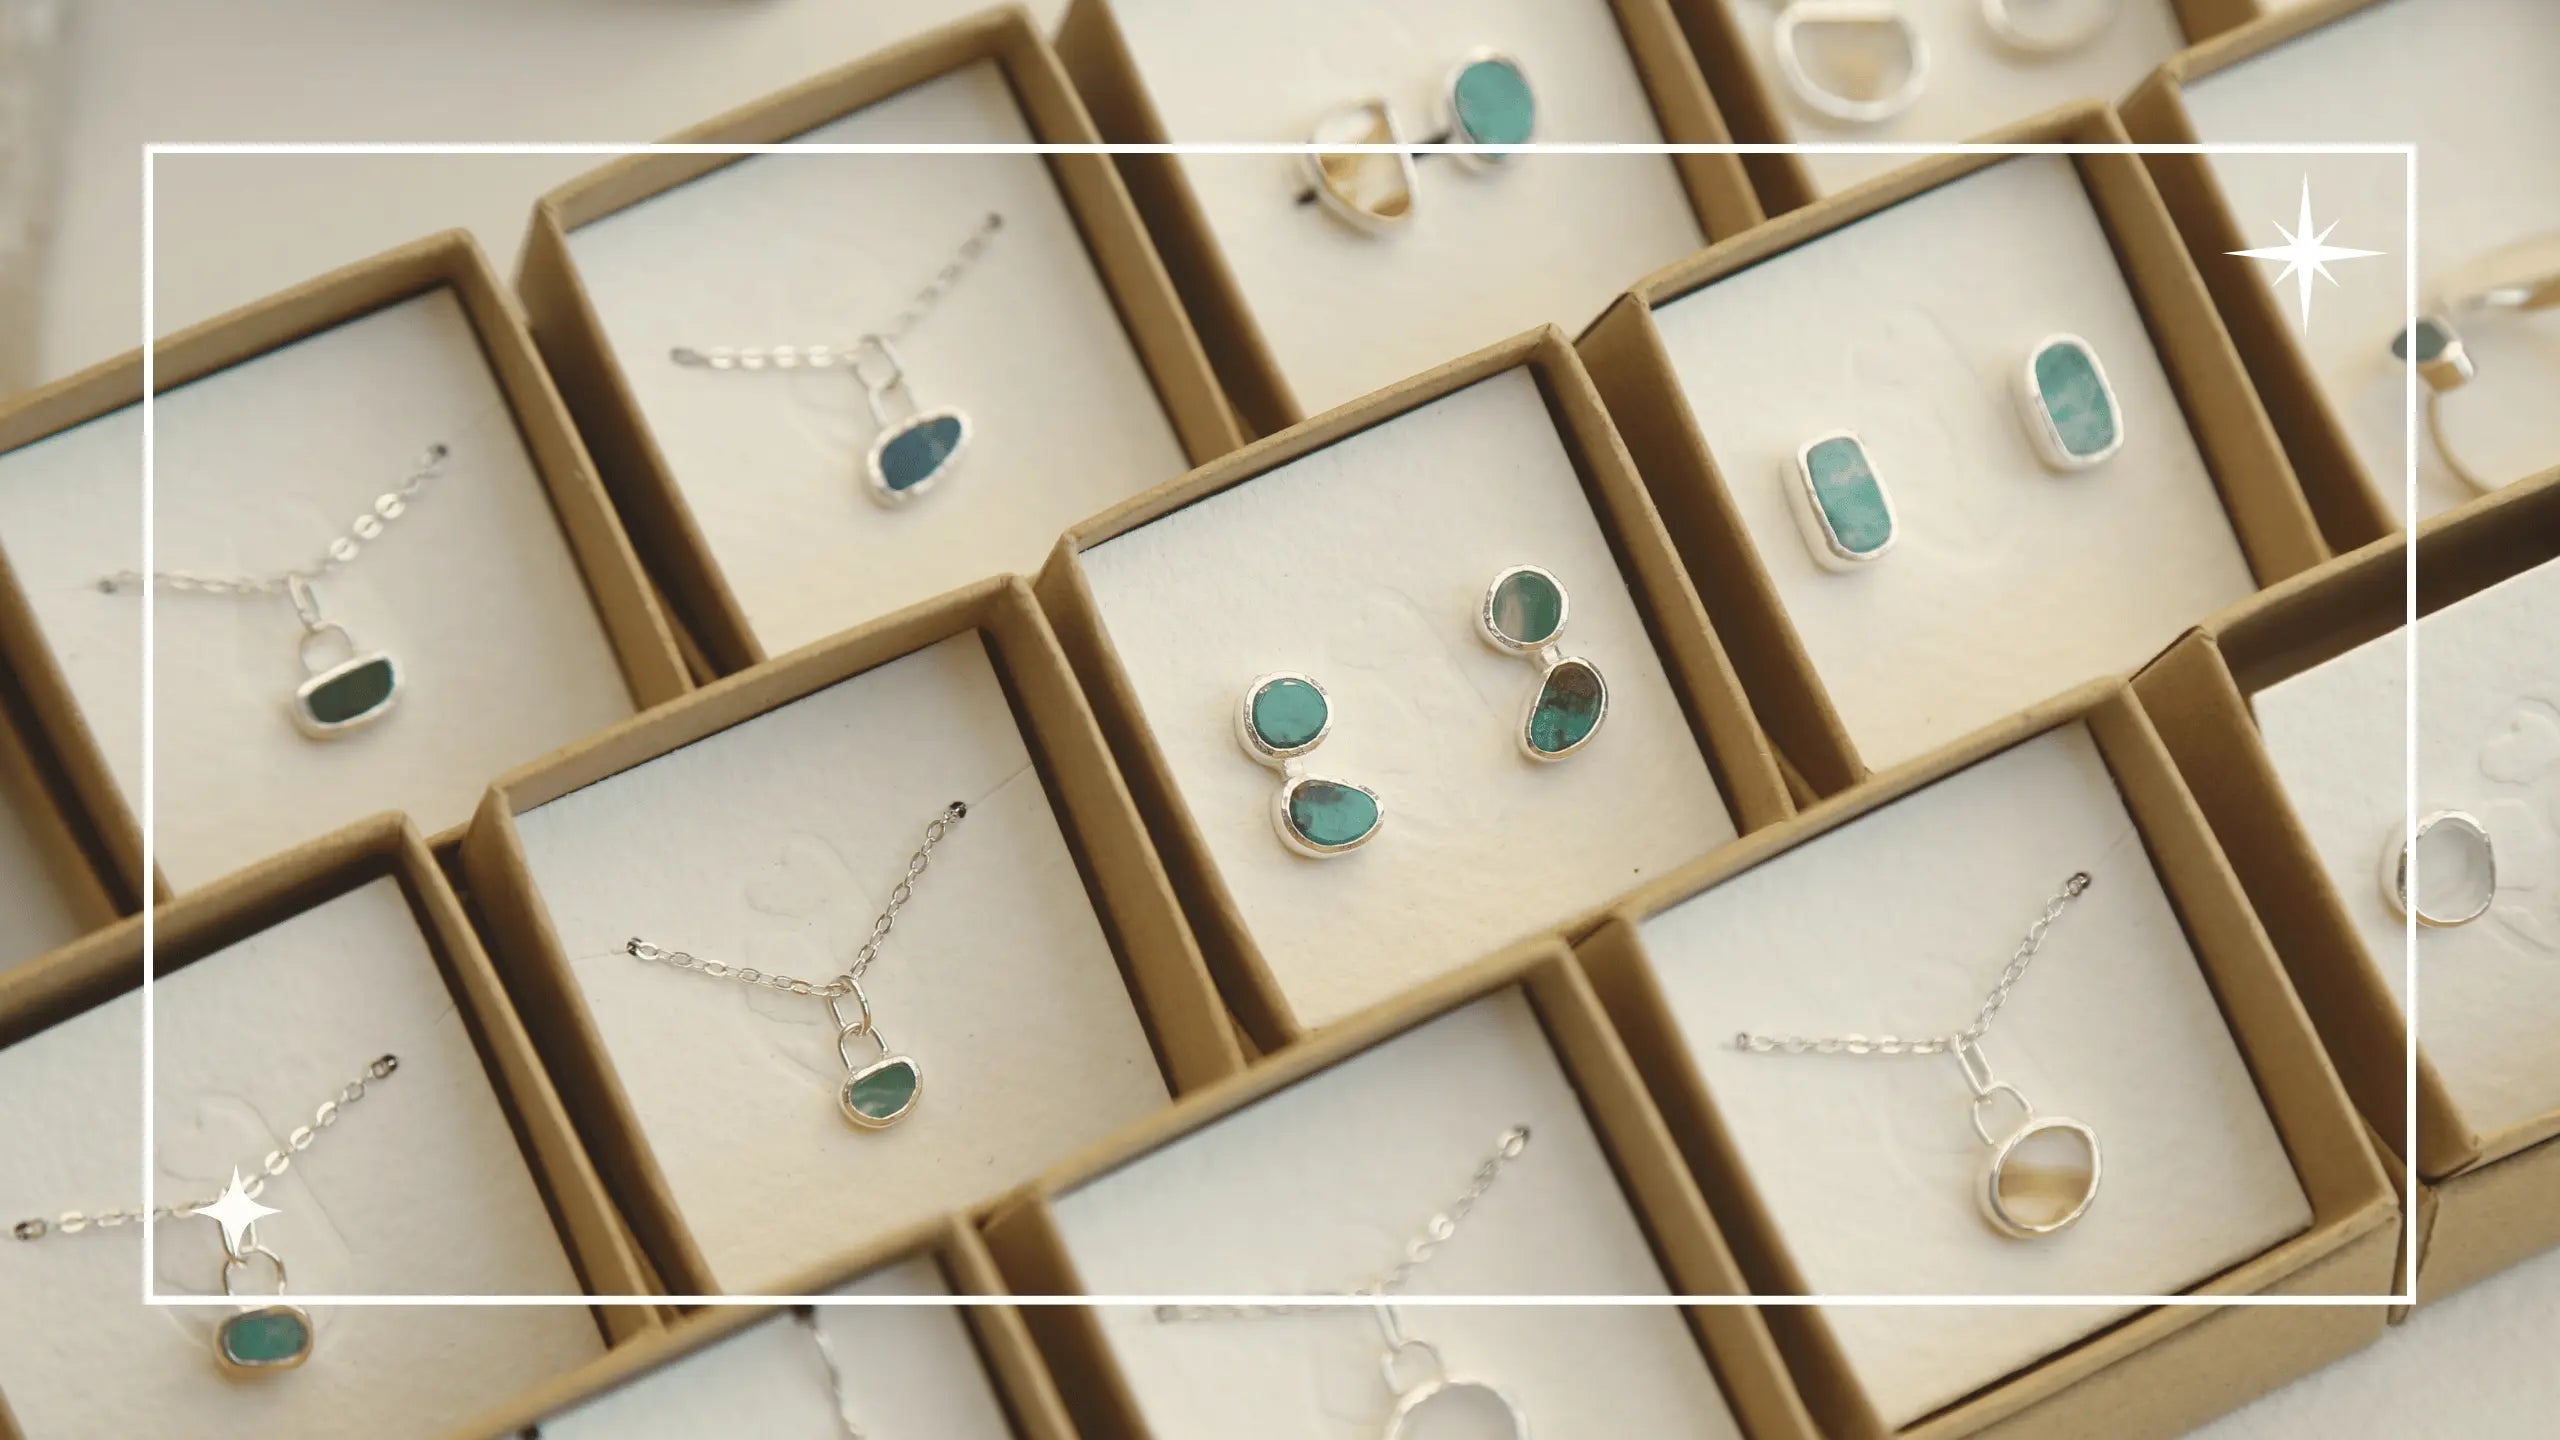 Unique Jewellery Shop by Jeweller Ashleigh Kennedy at The Fossick selling Handmade Jewellery Gifts